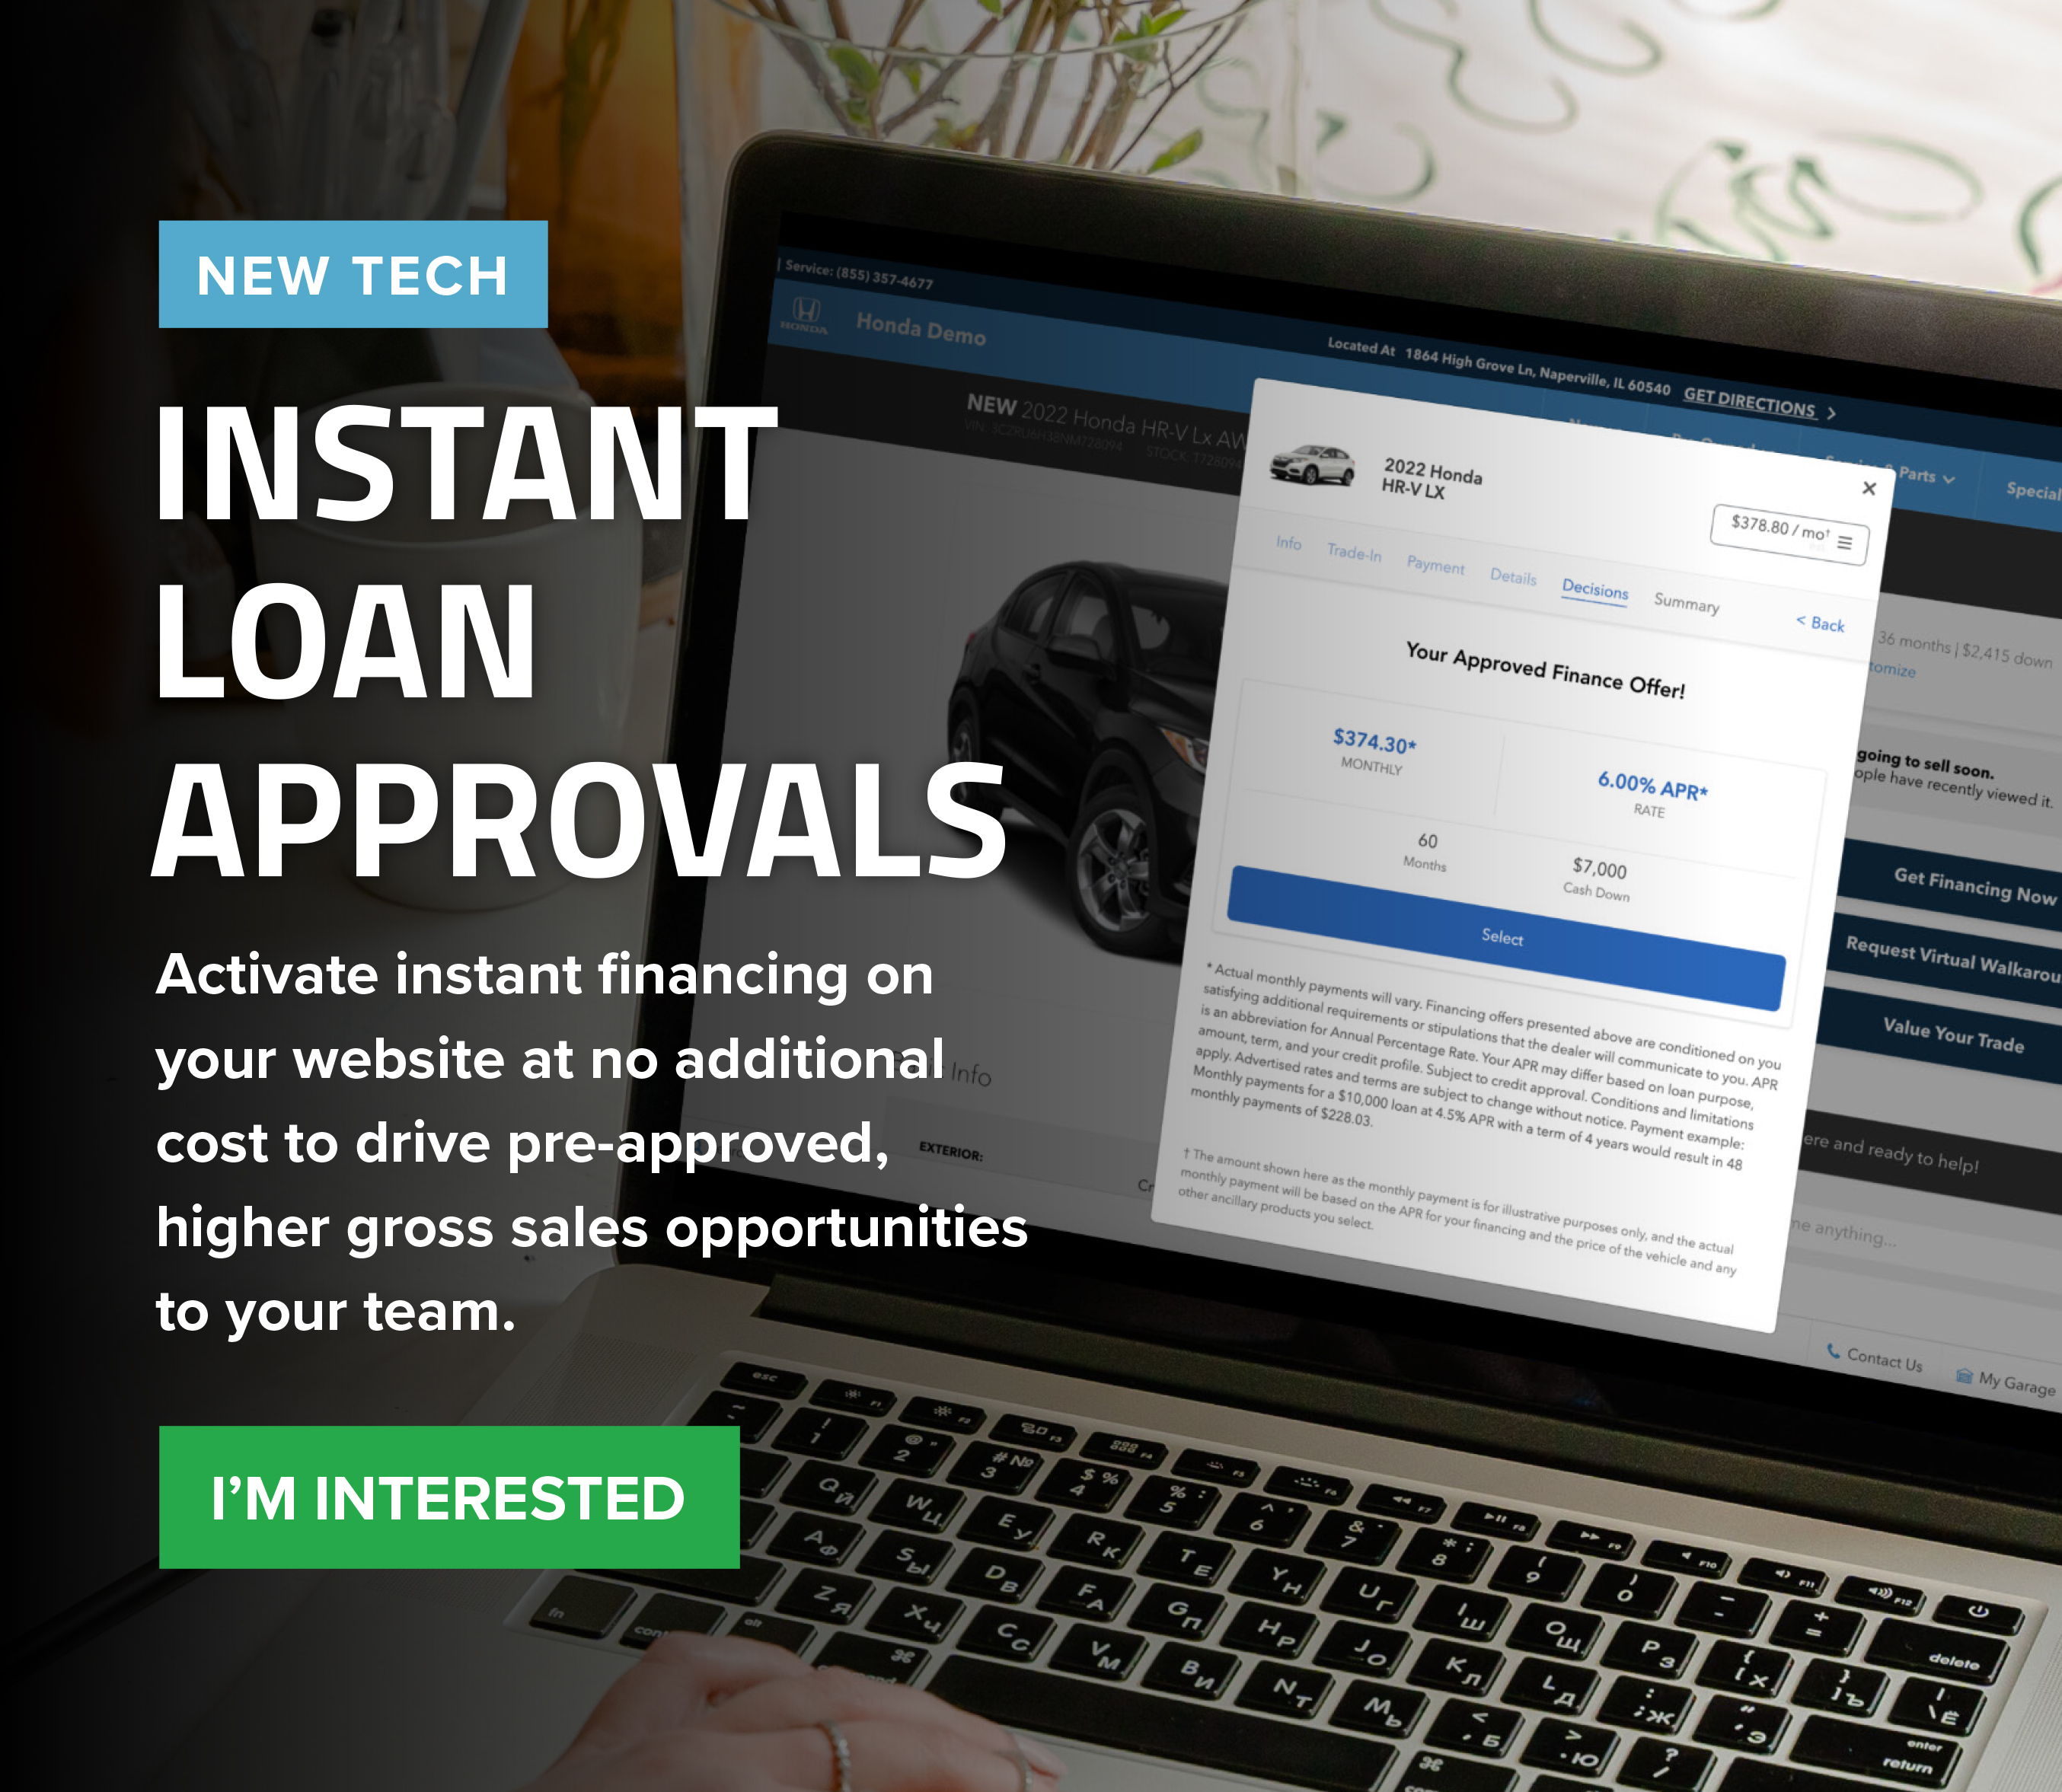 New Tech. Instant Loan Approvals. Activate Instant Financing On Your Website At No Additional Cost To Drive Pre-Approved, Higher Gross Sales Opportunities To Your Team. I'm Interested.